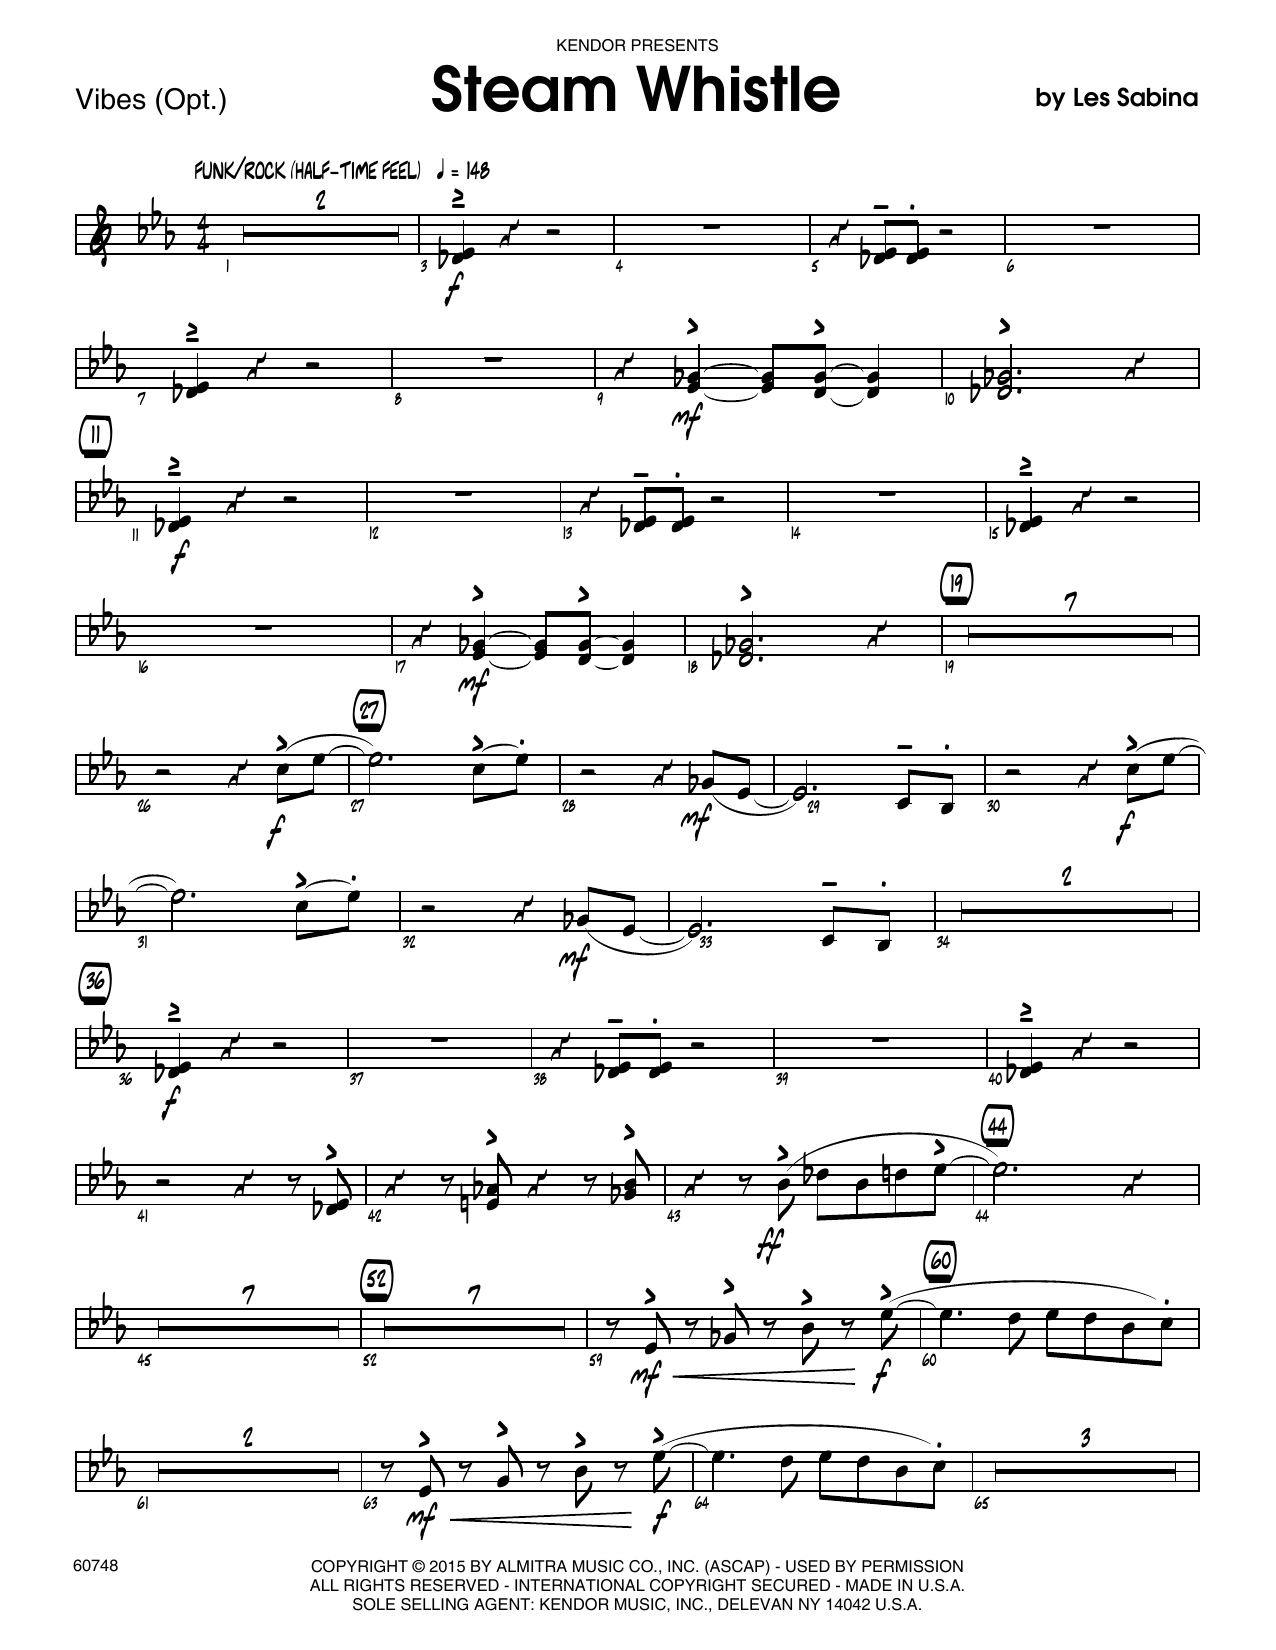 Download Les Sabina Steam Whistle - Vibes Sheet Music